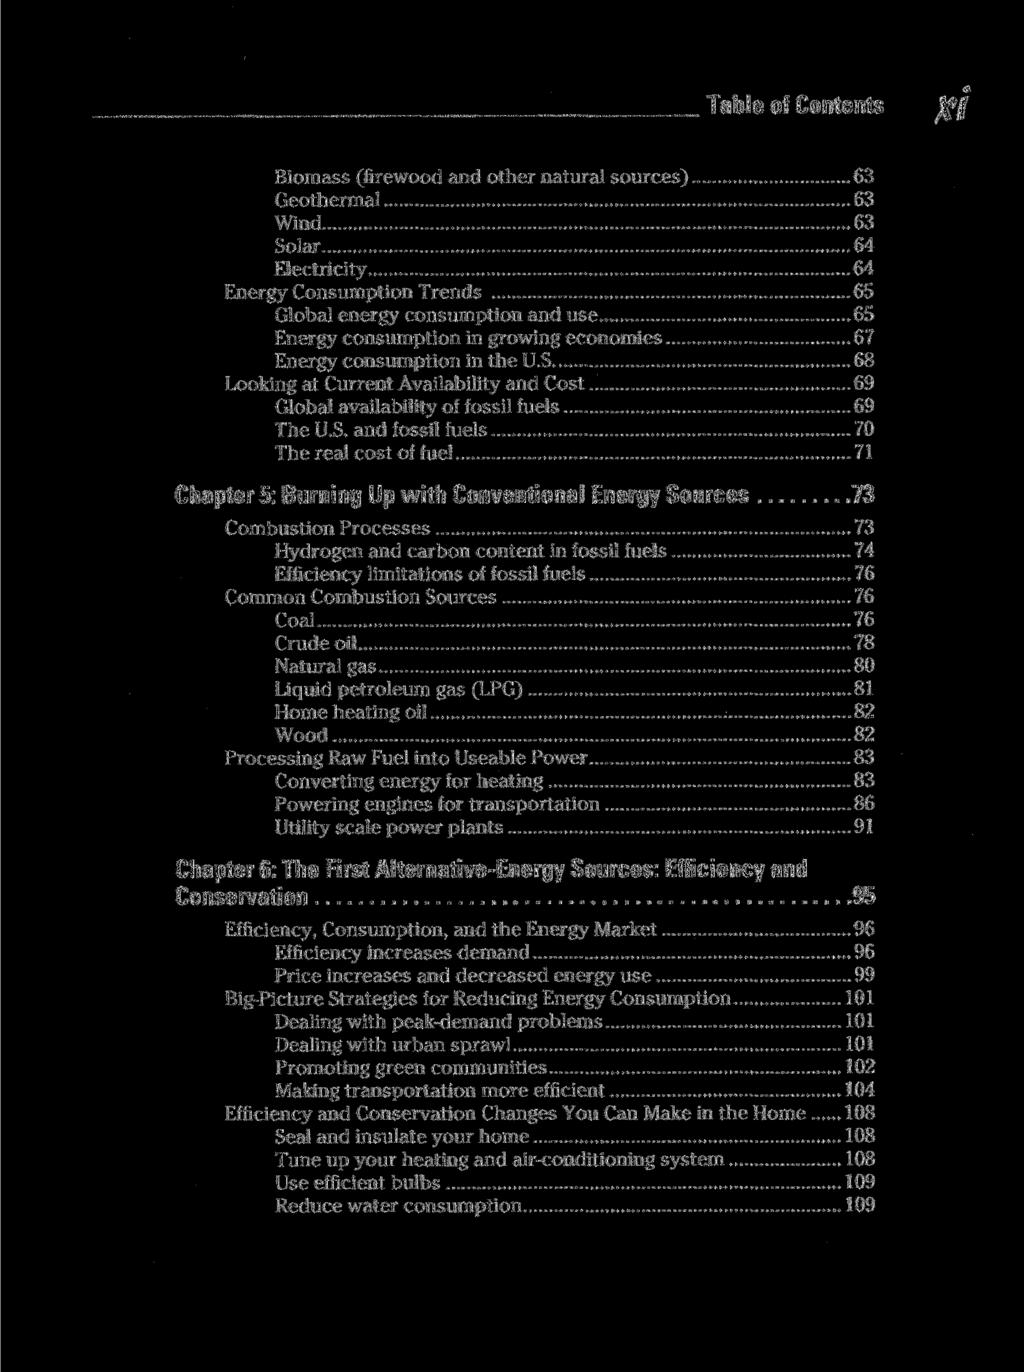 Table of Contents Biomass (firewood and other natural sources) 63 Geothermal 63 Wind 63 Solar 64 Electricity 64 Energy Consumption Trends 65 Global energy consumption and use 65 Energy consumption in